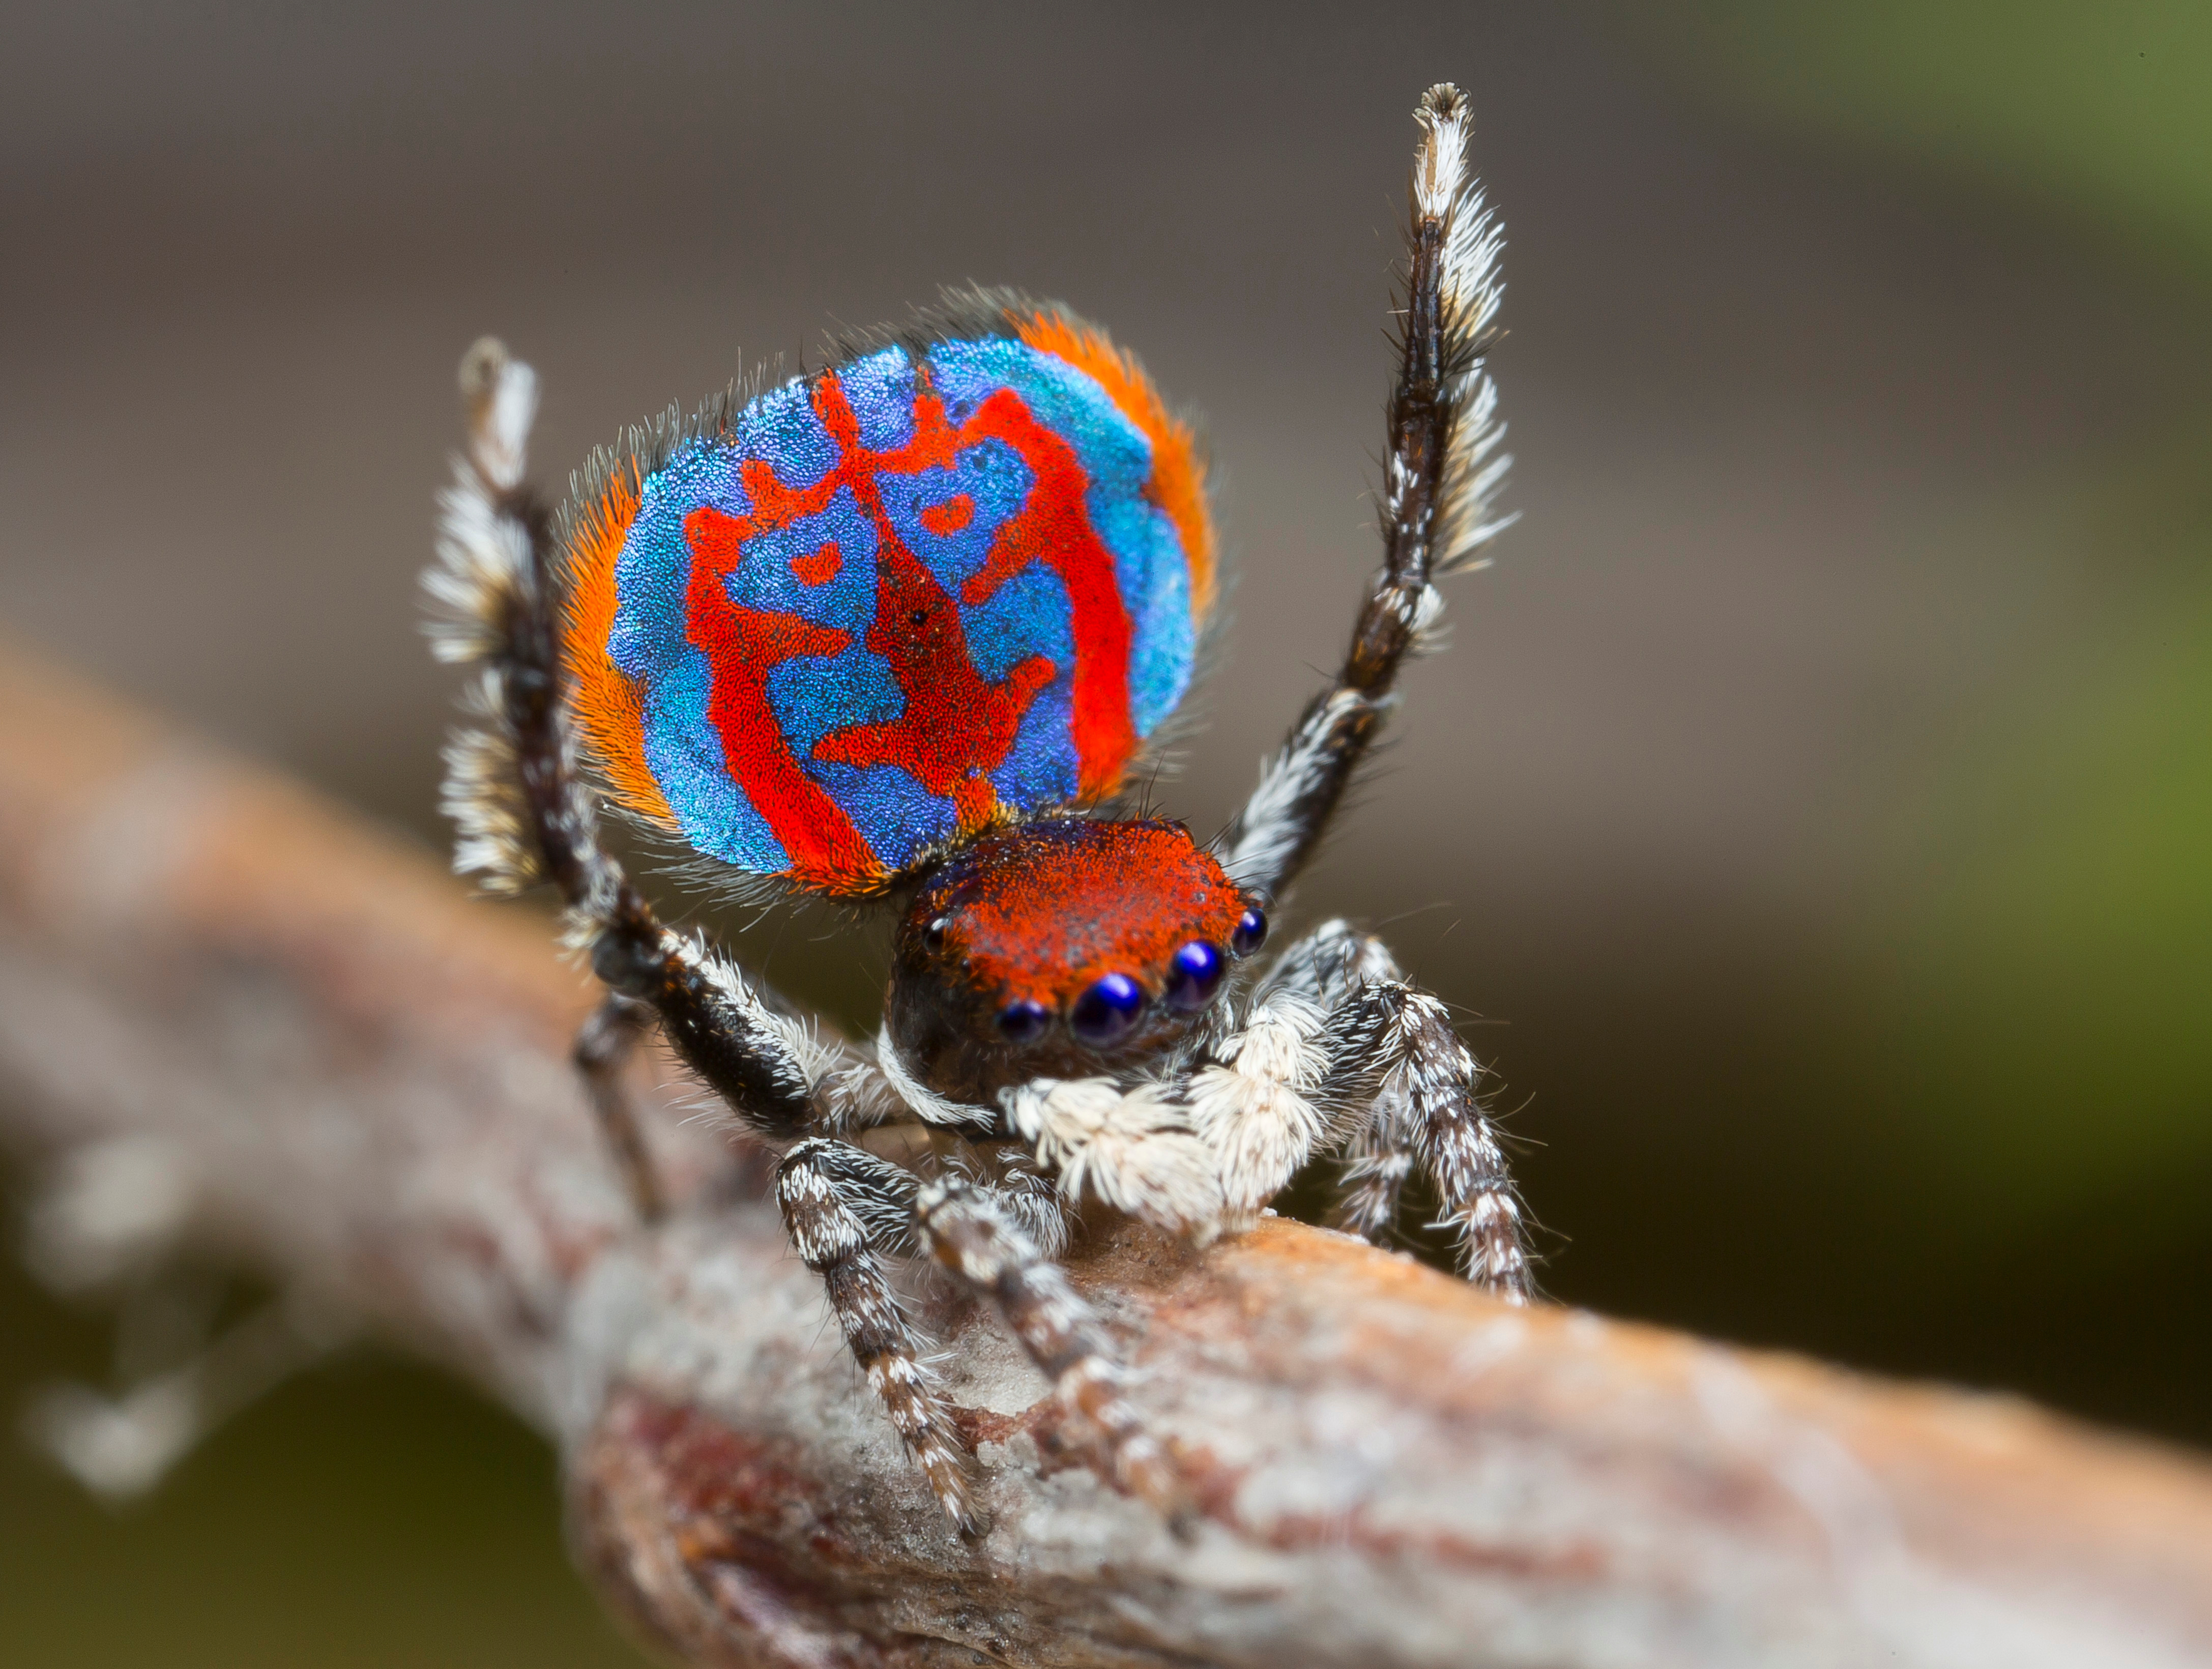 Australian Peacock Spider These Jumping Spiders From The Land Down Under Really Know How To